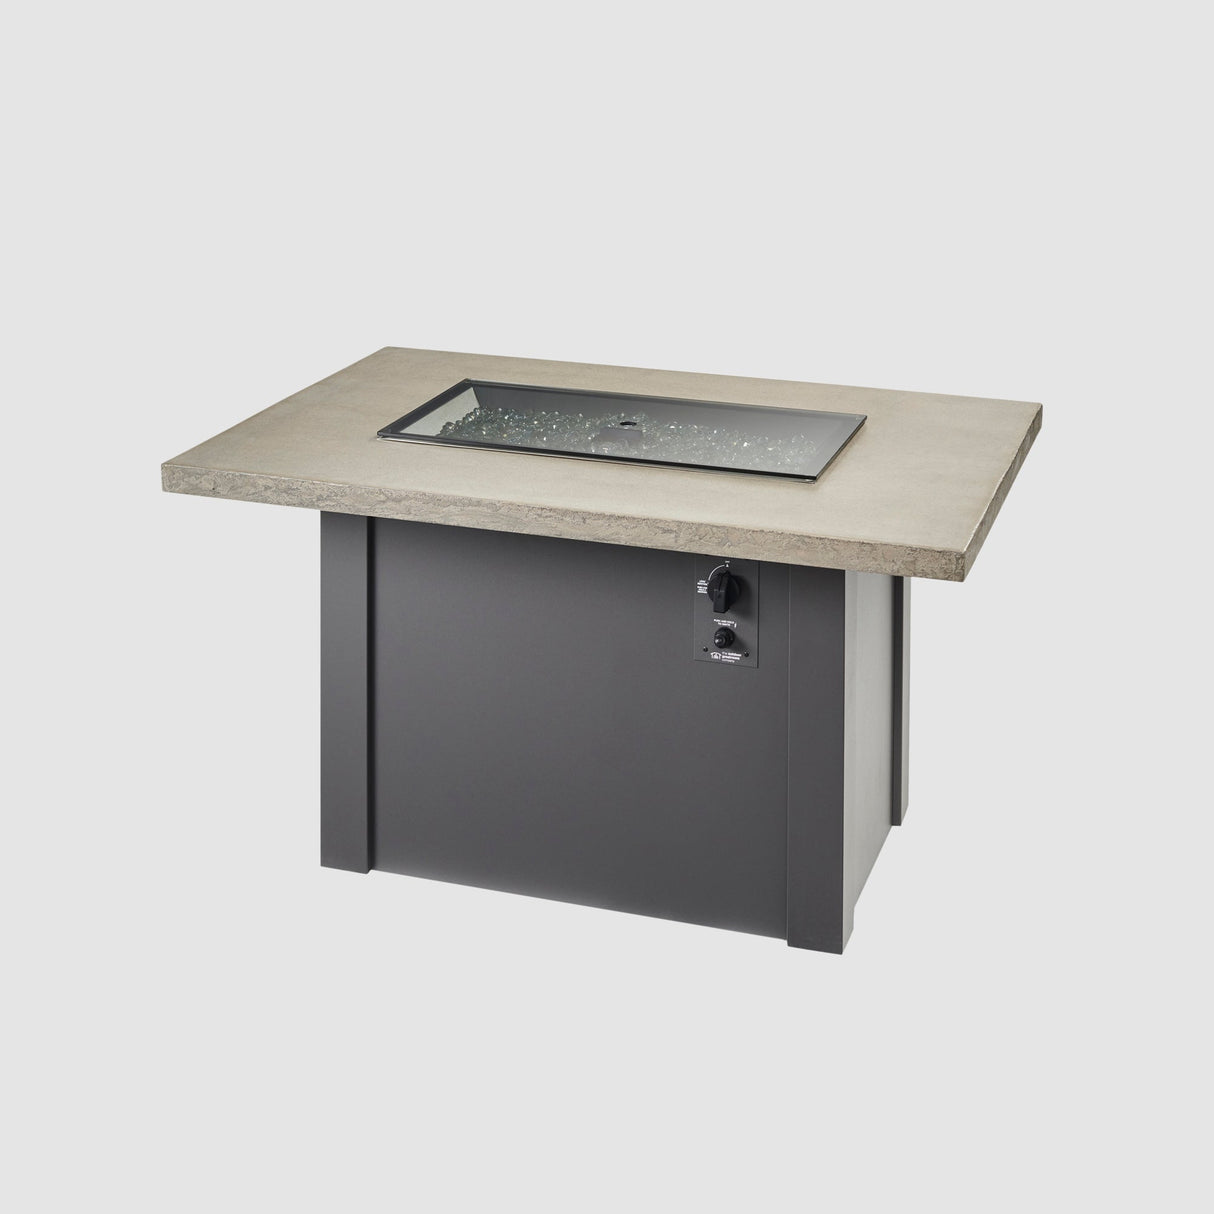 A cover placed on the burner of a Havenwood Rectangular Gas Fire Pit Table with a Pebble Grey top and Graphite Grey base